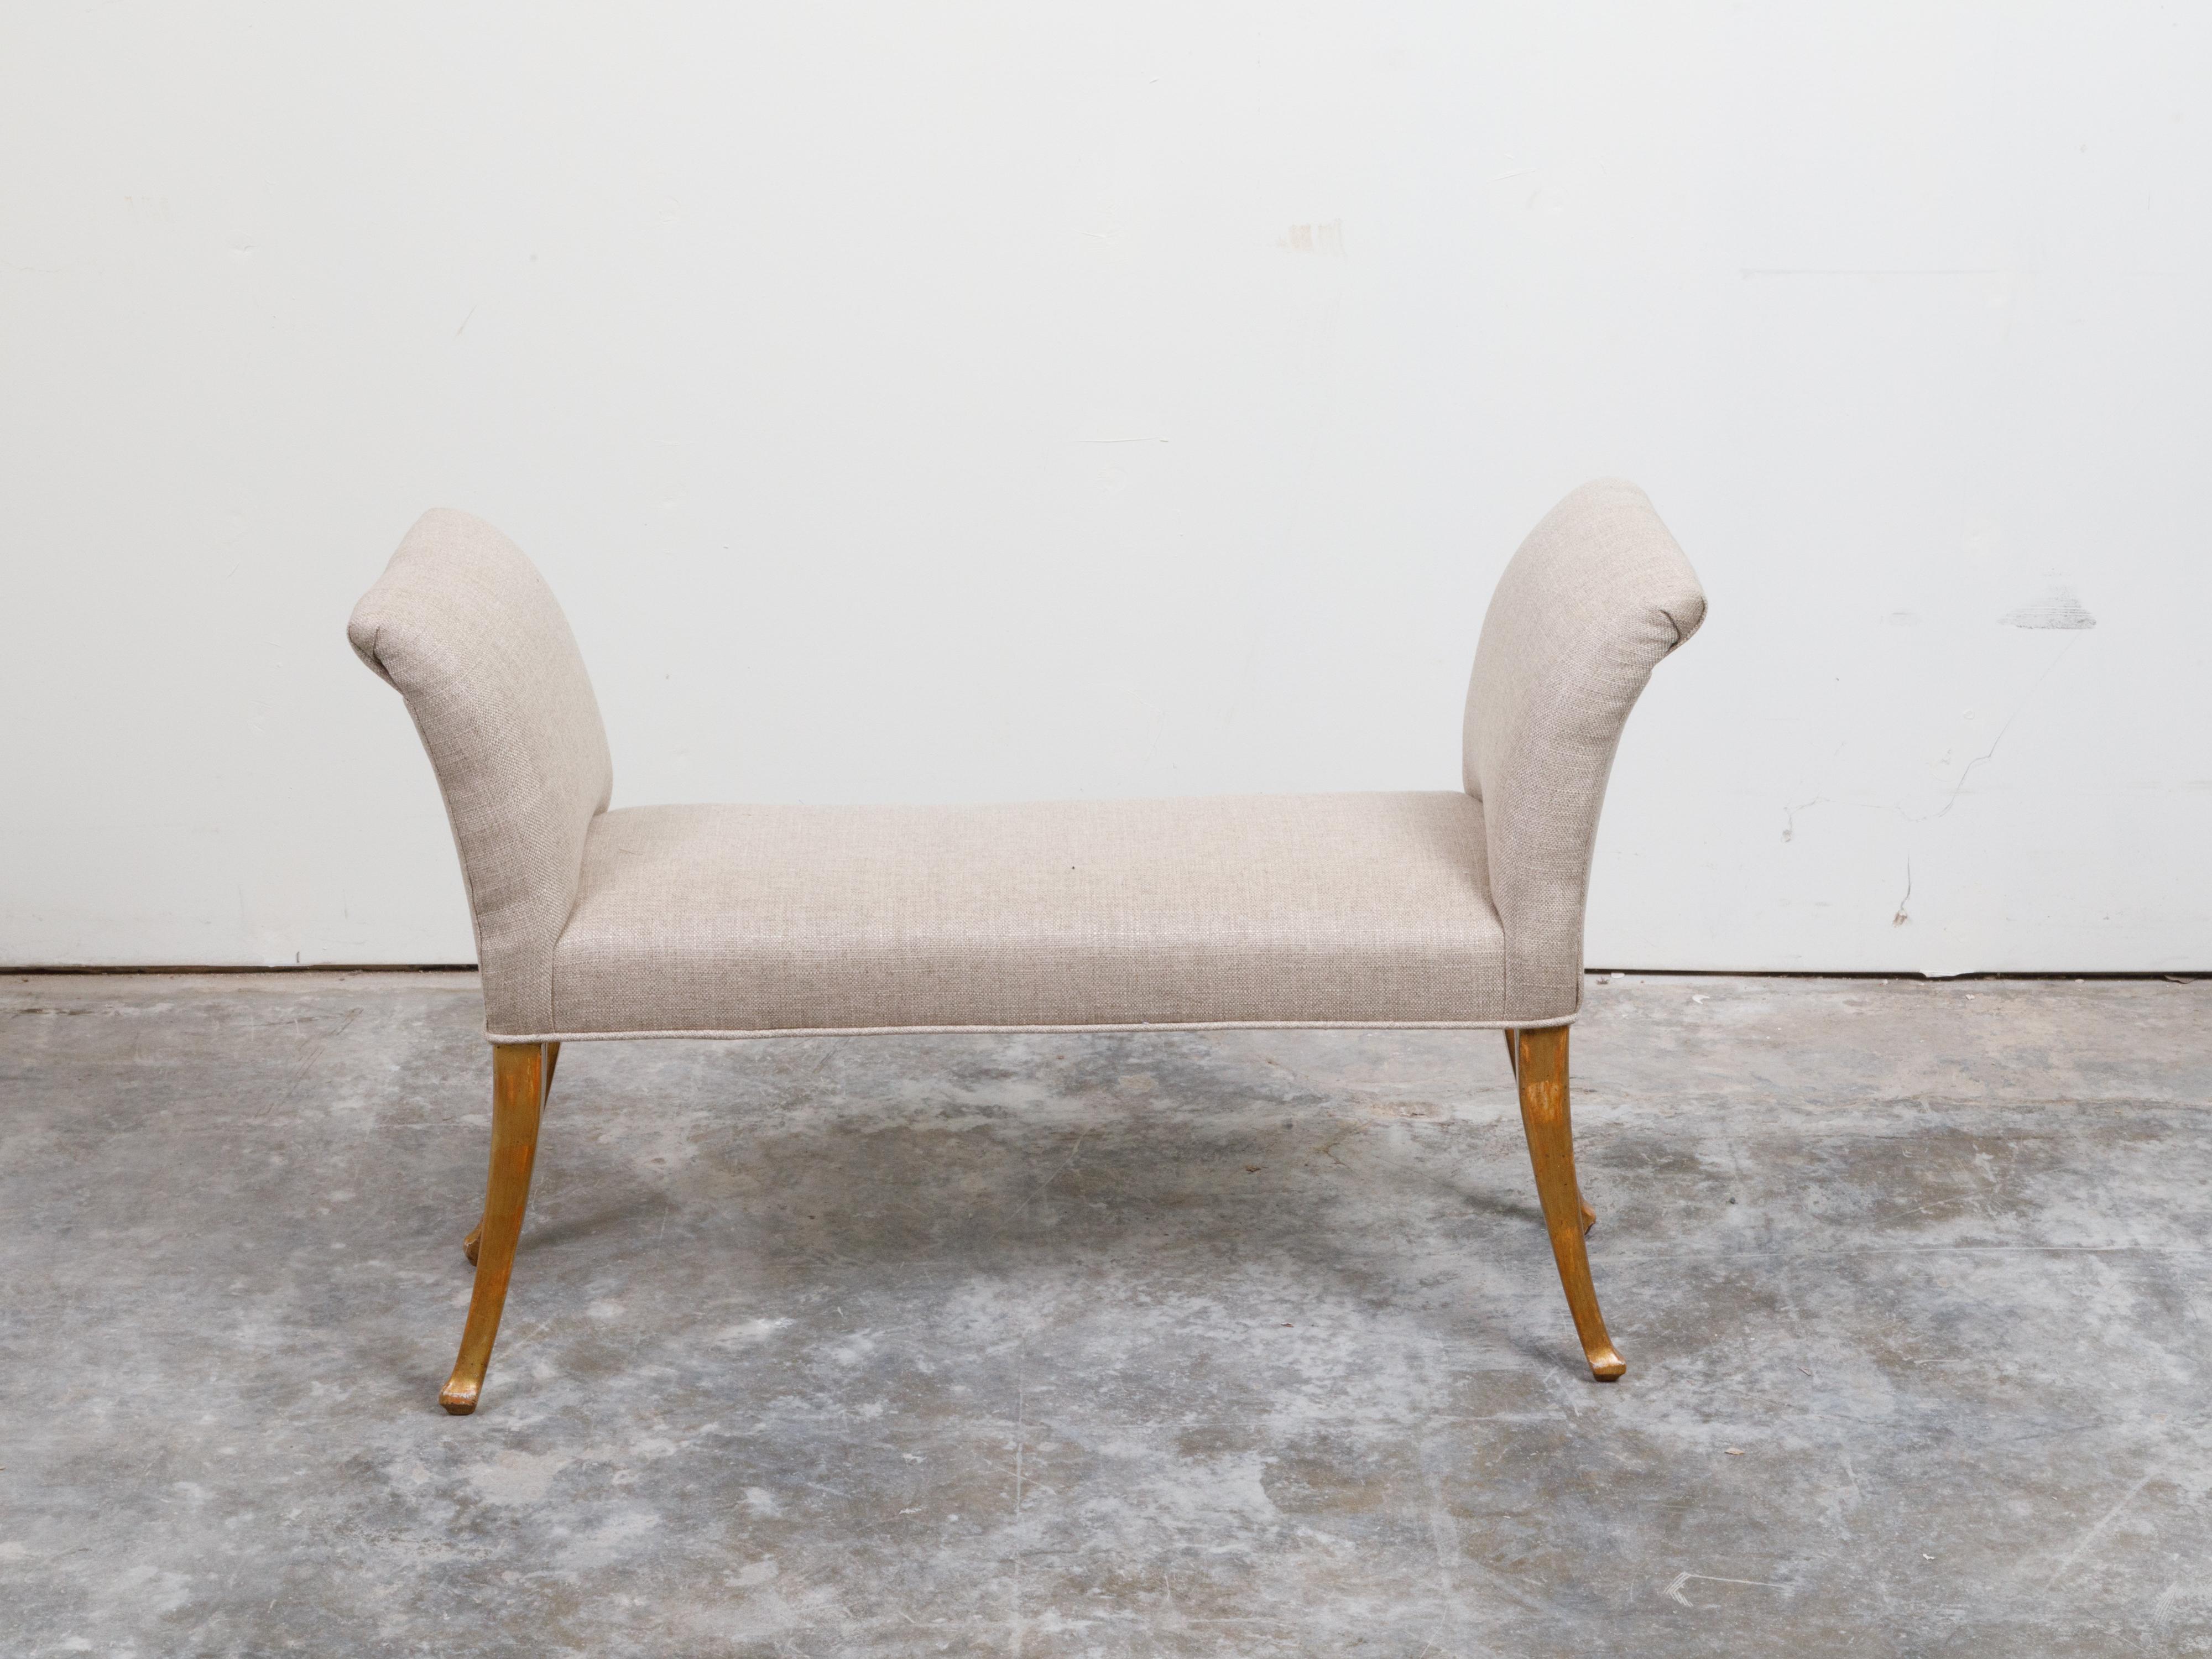 A French giltwood bench from the mid 20th century, with out-scrolling arms, saber legs and new upholstery. Created in France during the mid-century period, this window bench features two out-scrolling arms flanking a rectangular seat, all newly